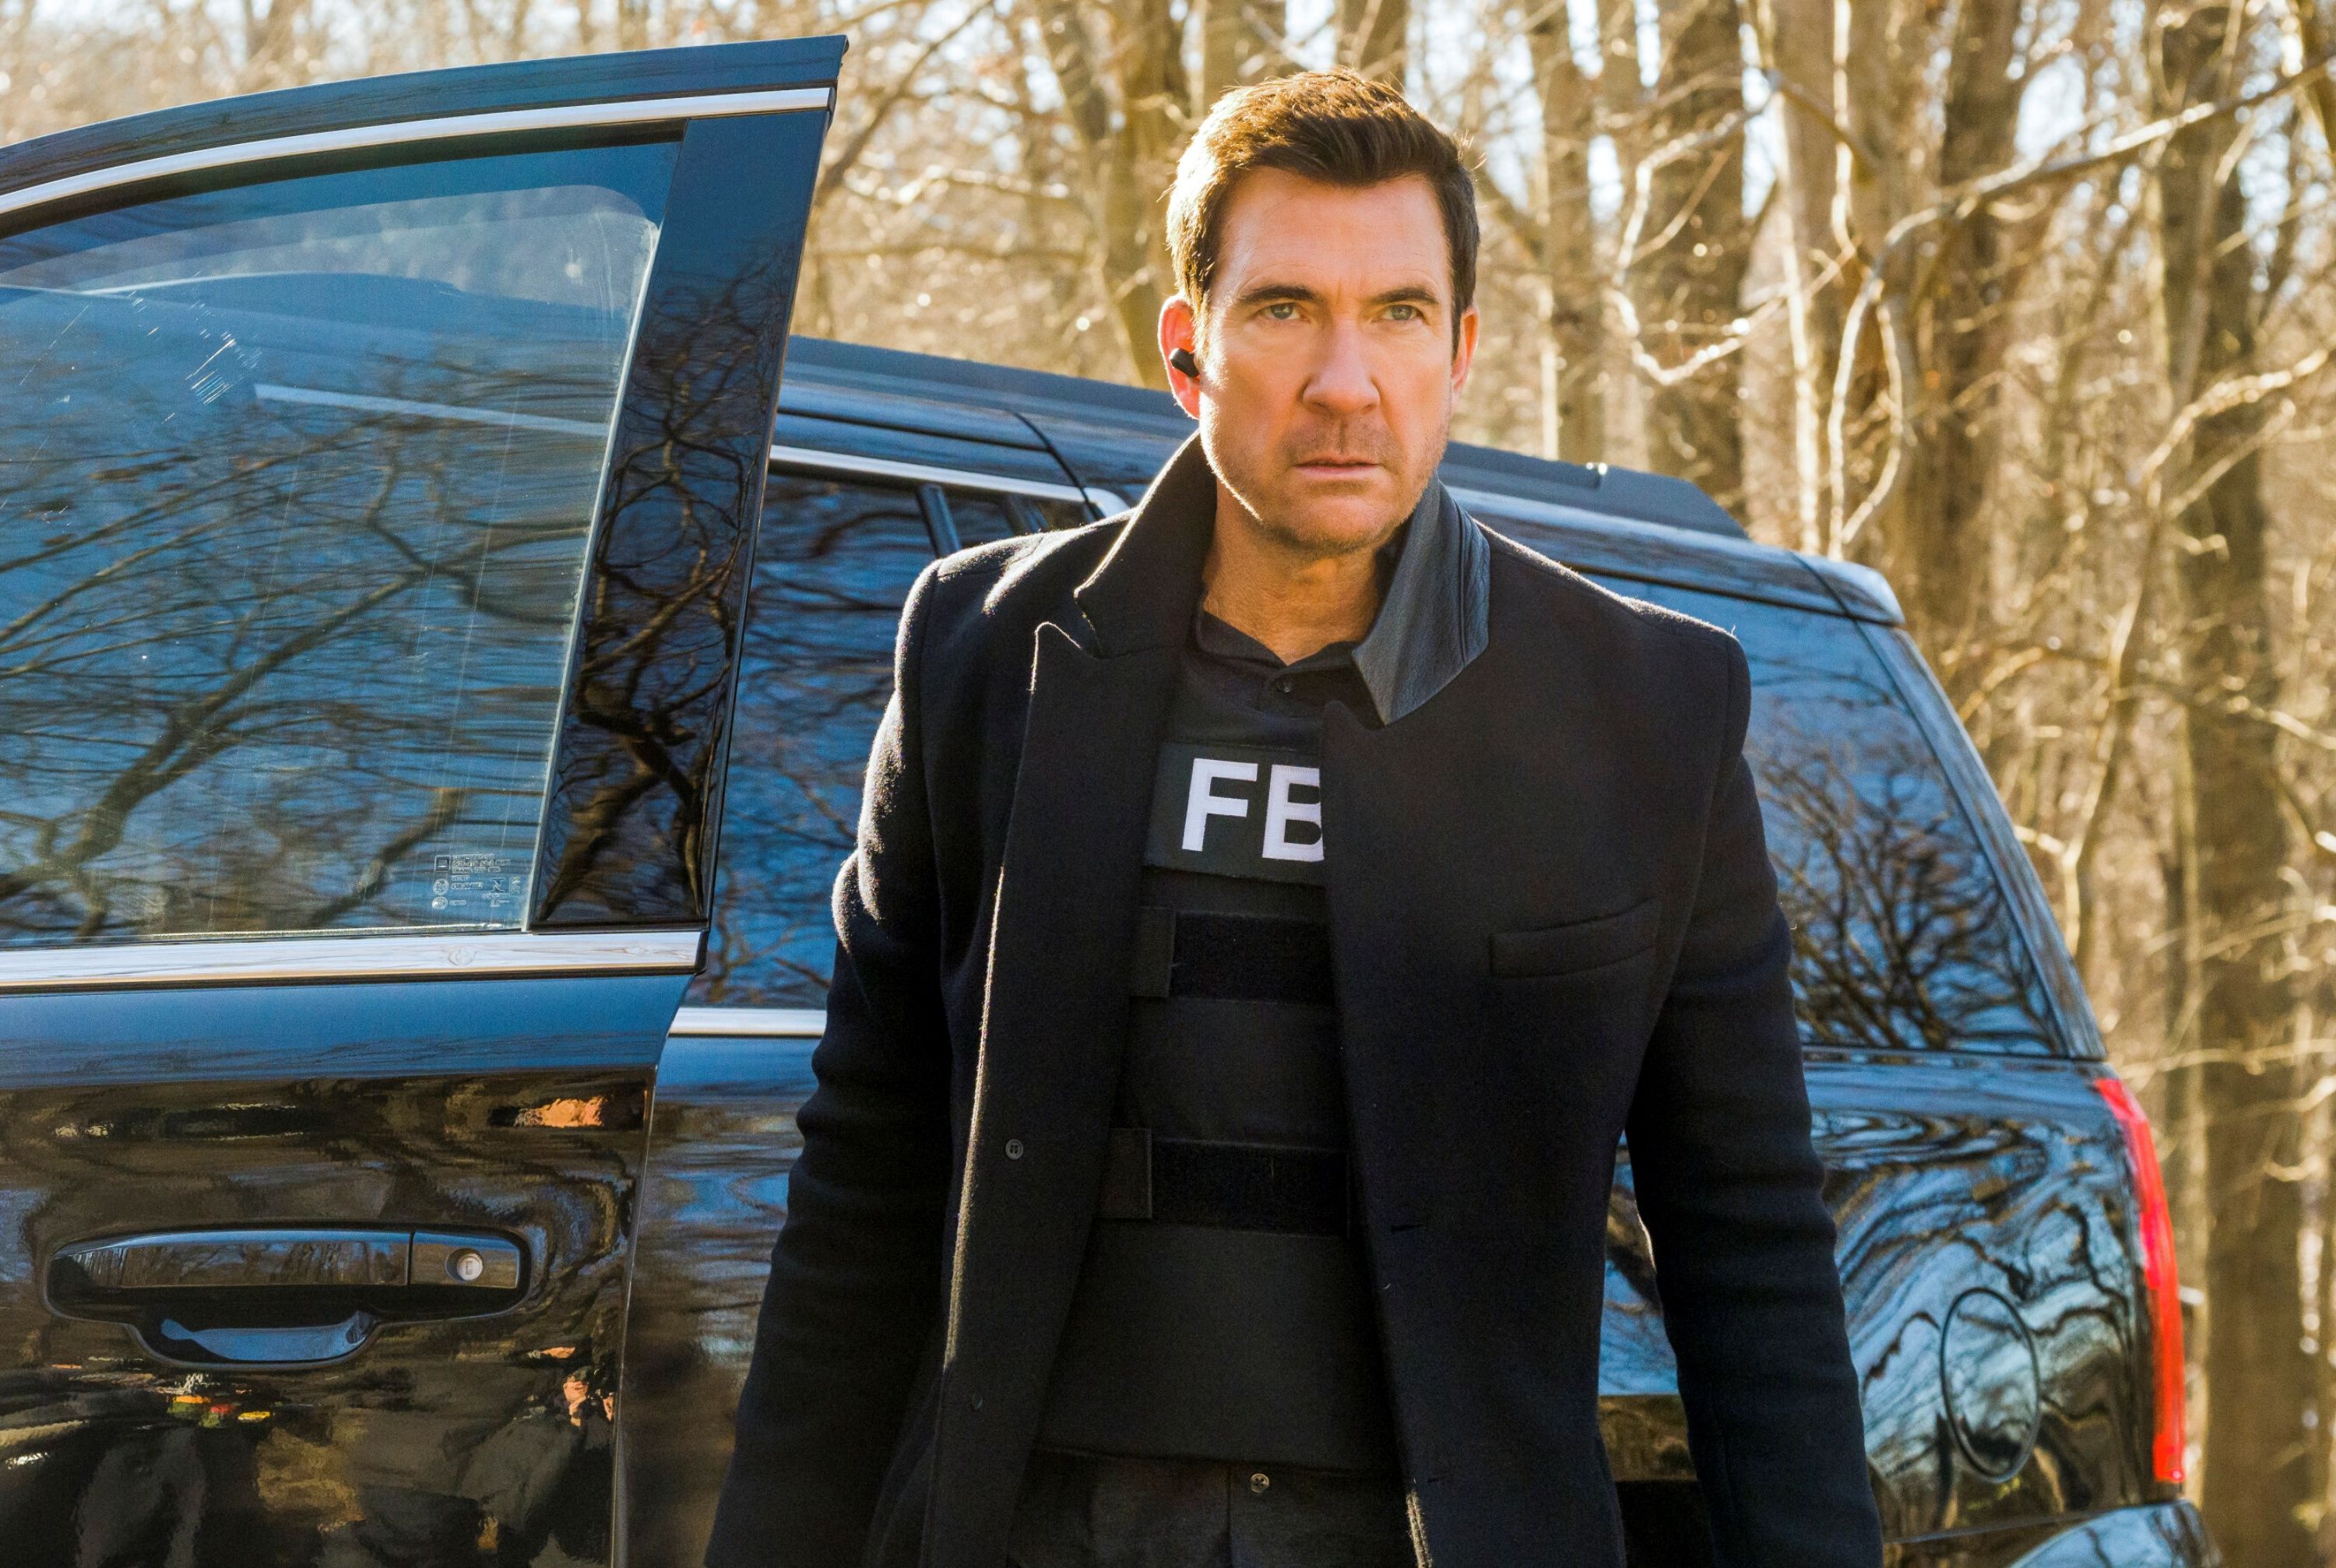 Dylan McDermott as Special Agent Remy Scott in Season 4 Episode 12 of FBI: Most Wanted